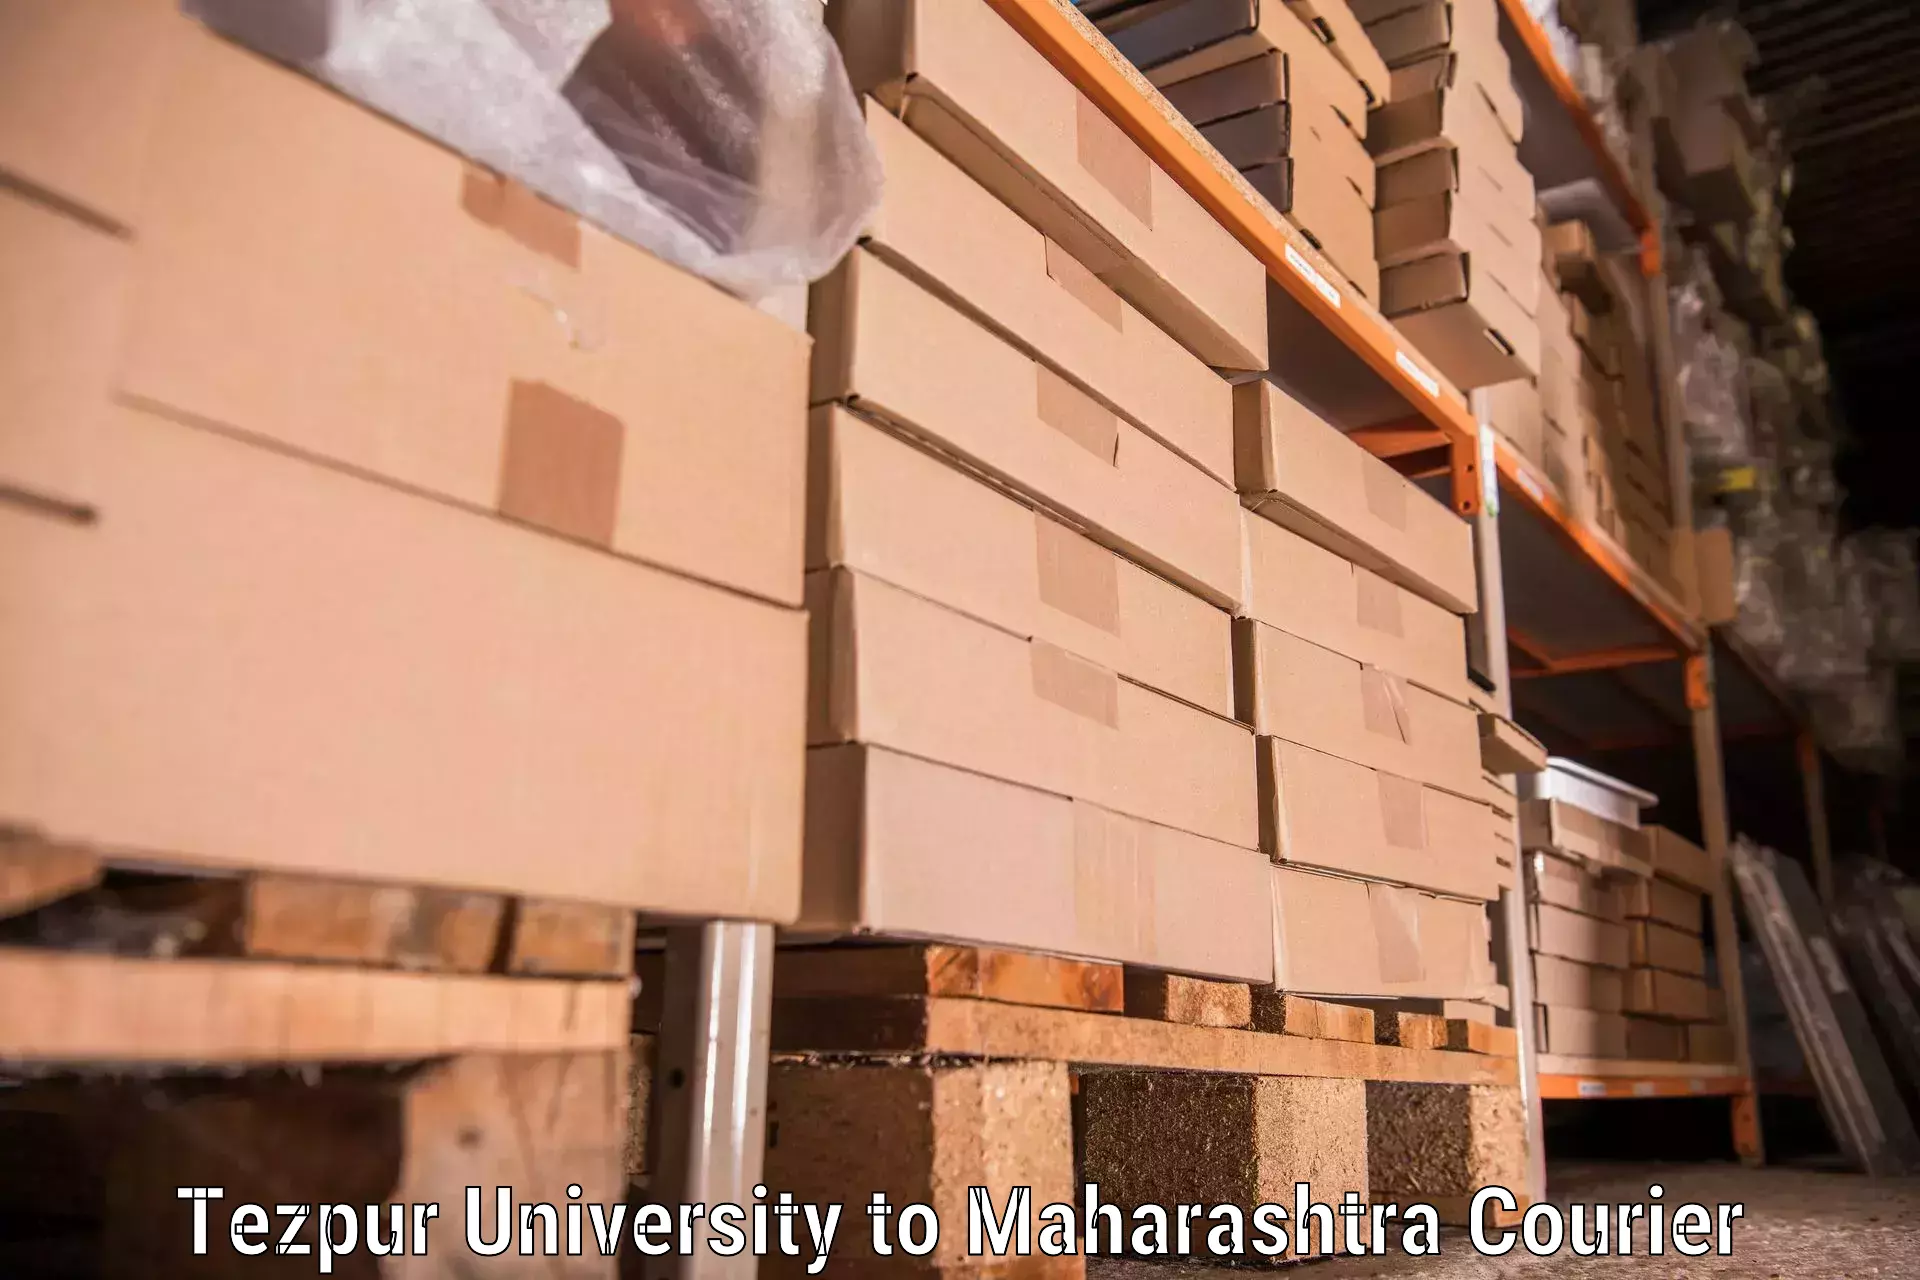 High-quality moving services Tezpur University to Worli